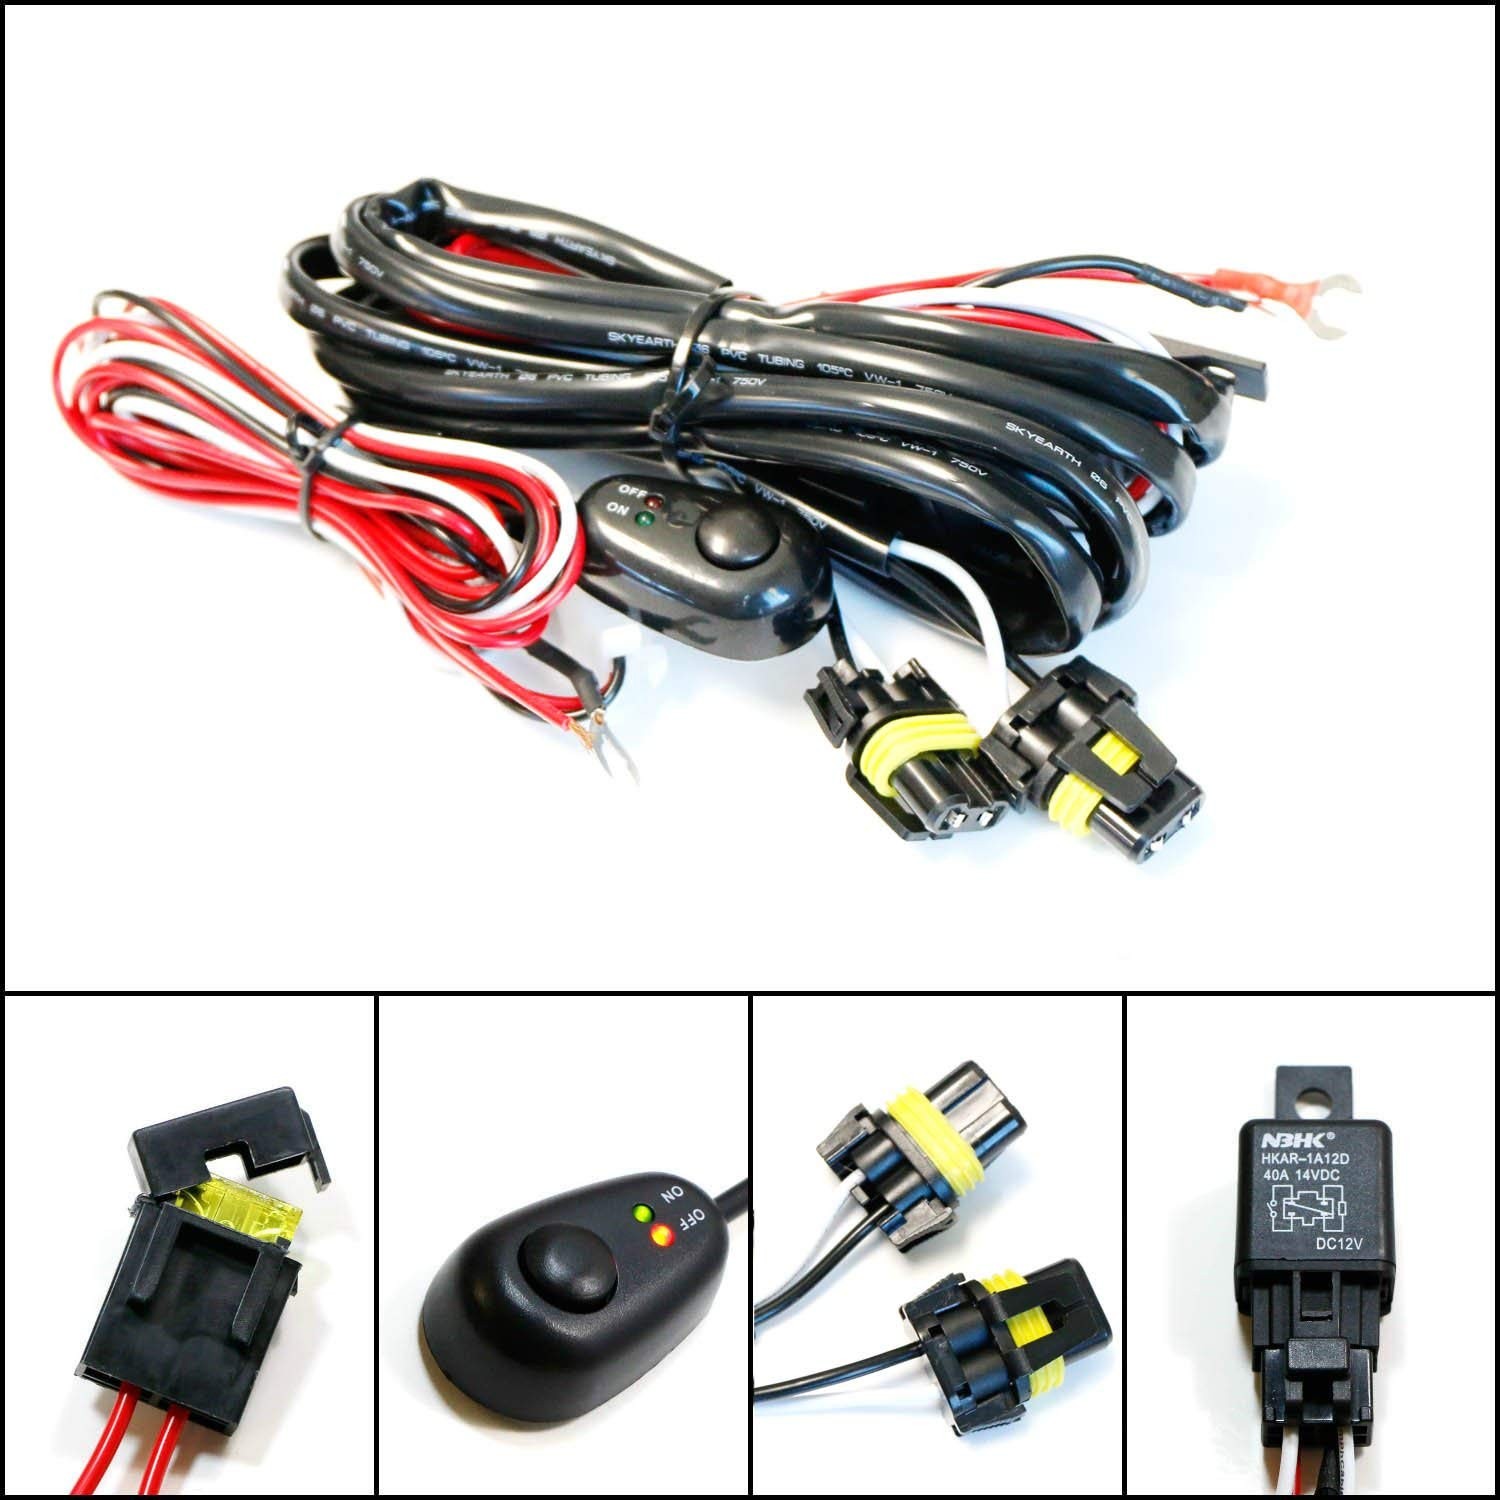 Amazon iJDMTOY 1 9005 9006 H10 Relay Harness Wire Kit with LED Light ON OFF Switch For Aftermarket Fog Lights Driving Lights HID Conversion Kit